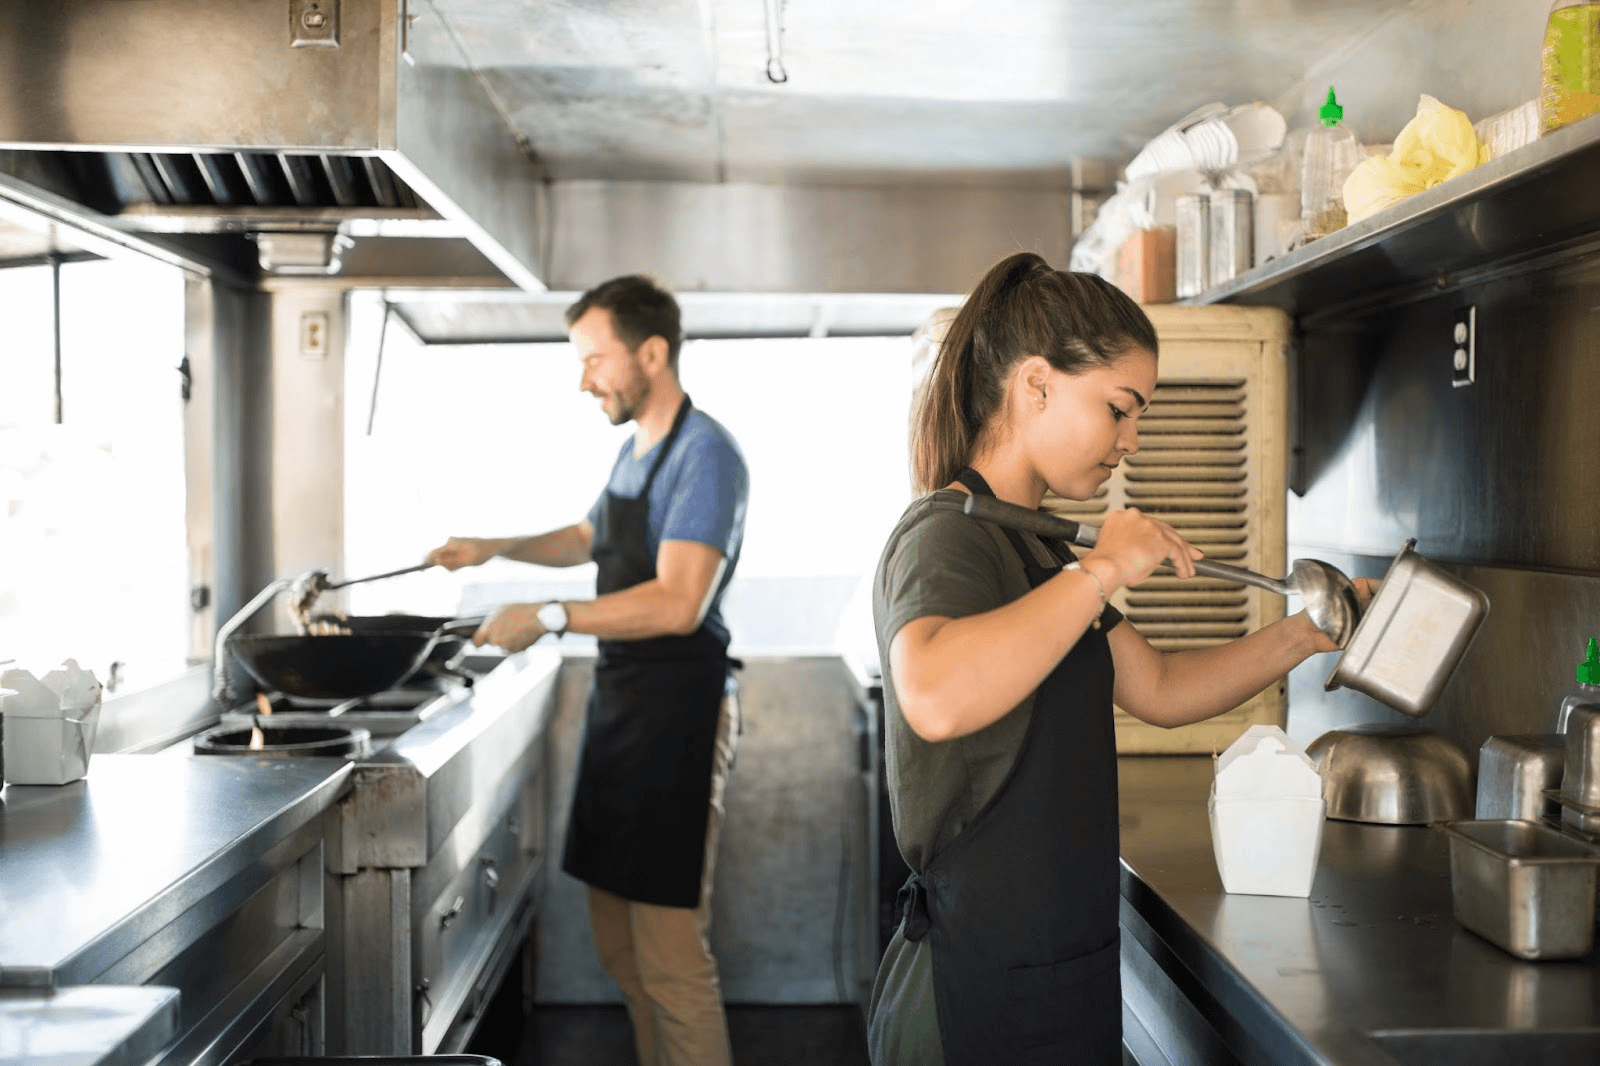 What Kind of Venitlation Hood do you Need for a Food Truck? | Hoodmart